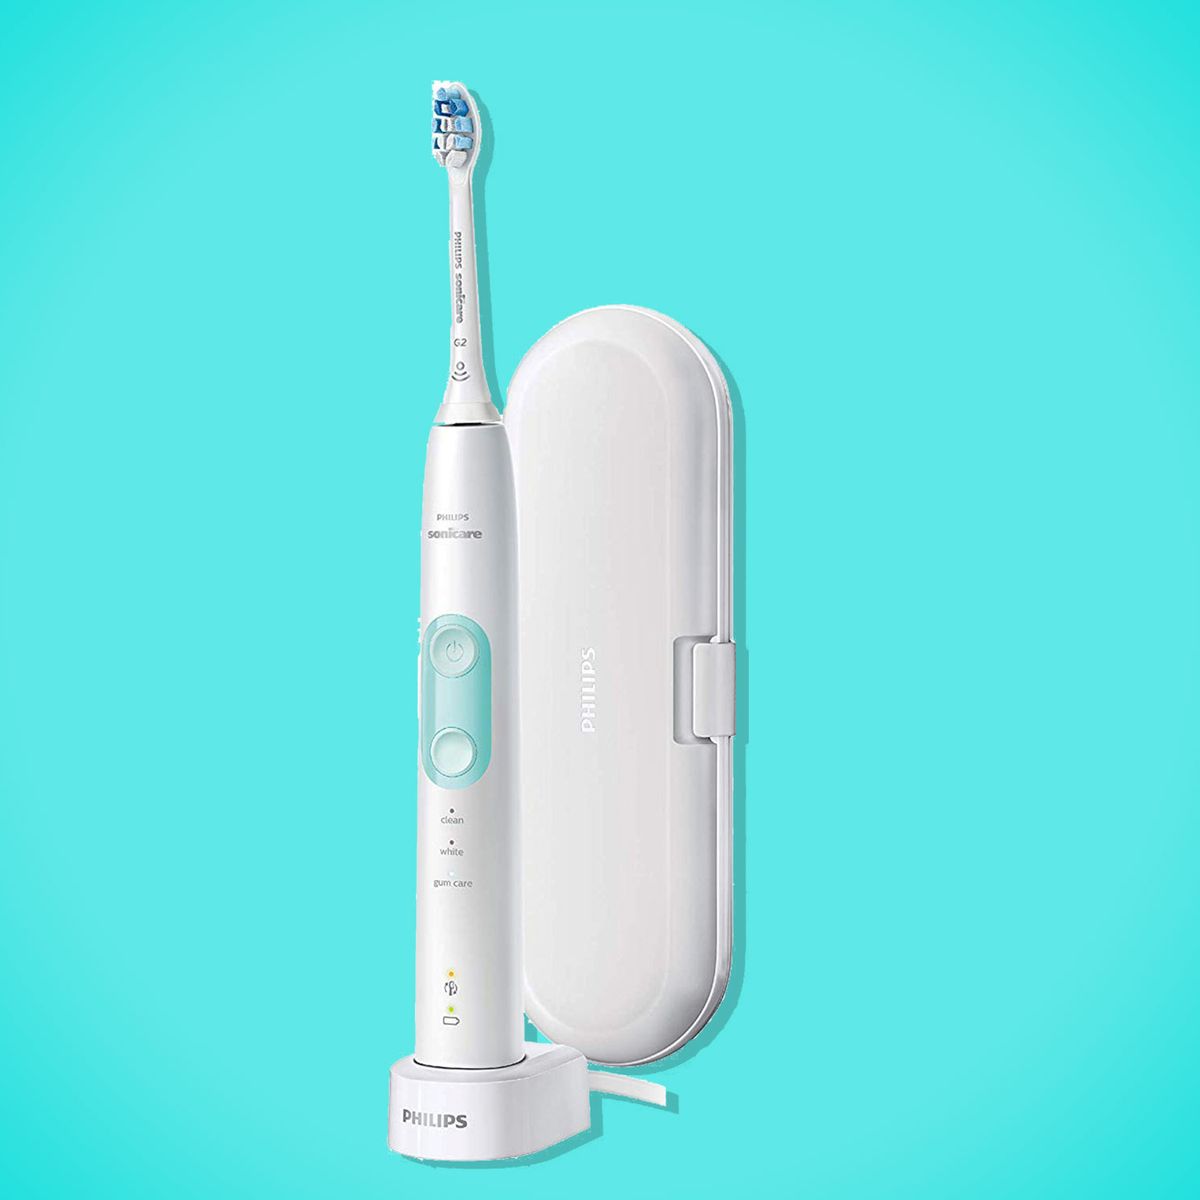 Philips Sonicare ProtectiveClean Toothbrush Review 2019 | The Strategist